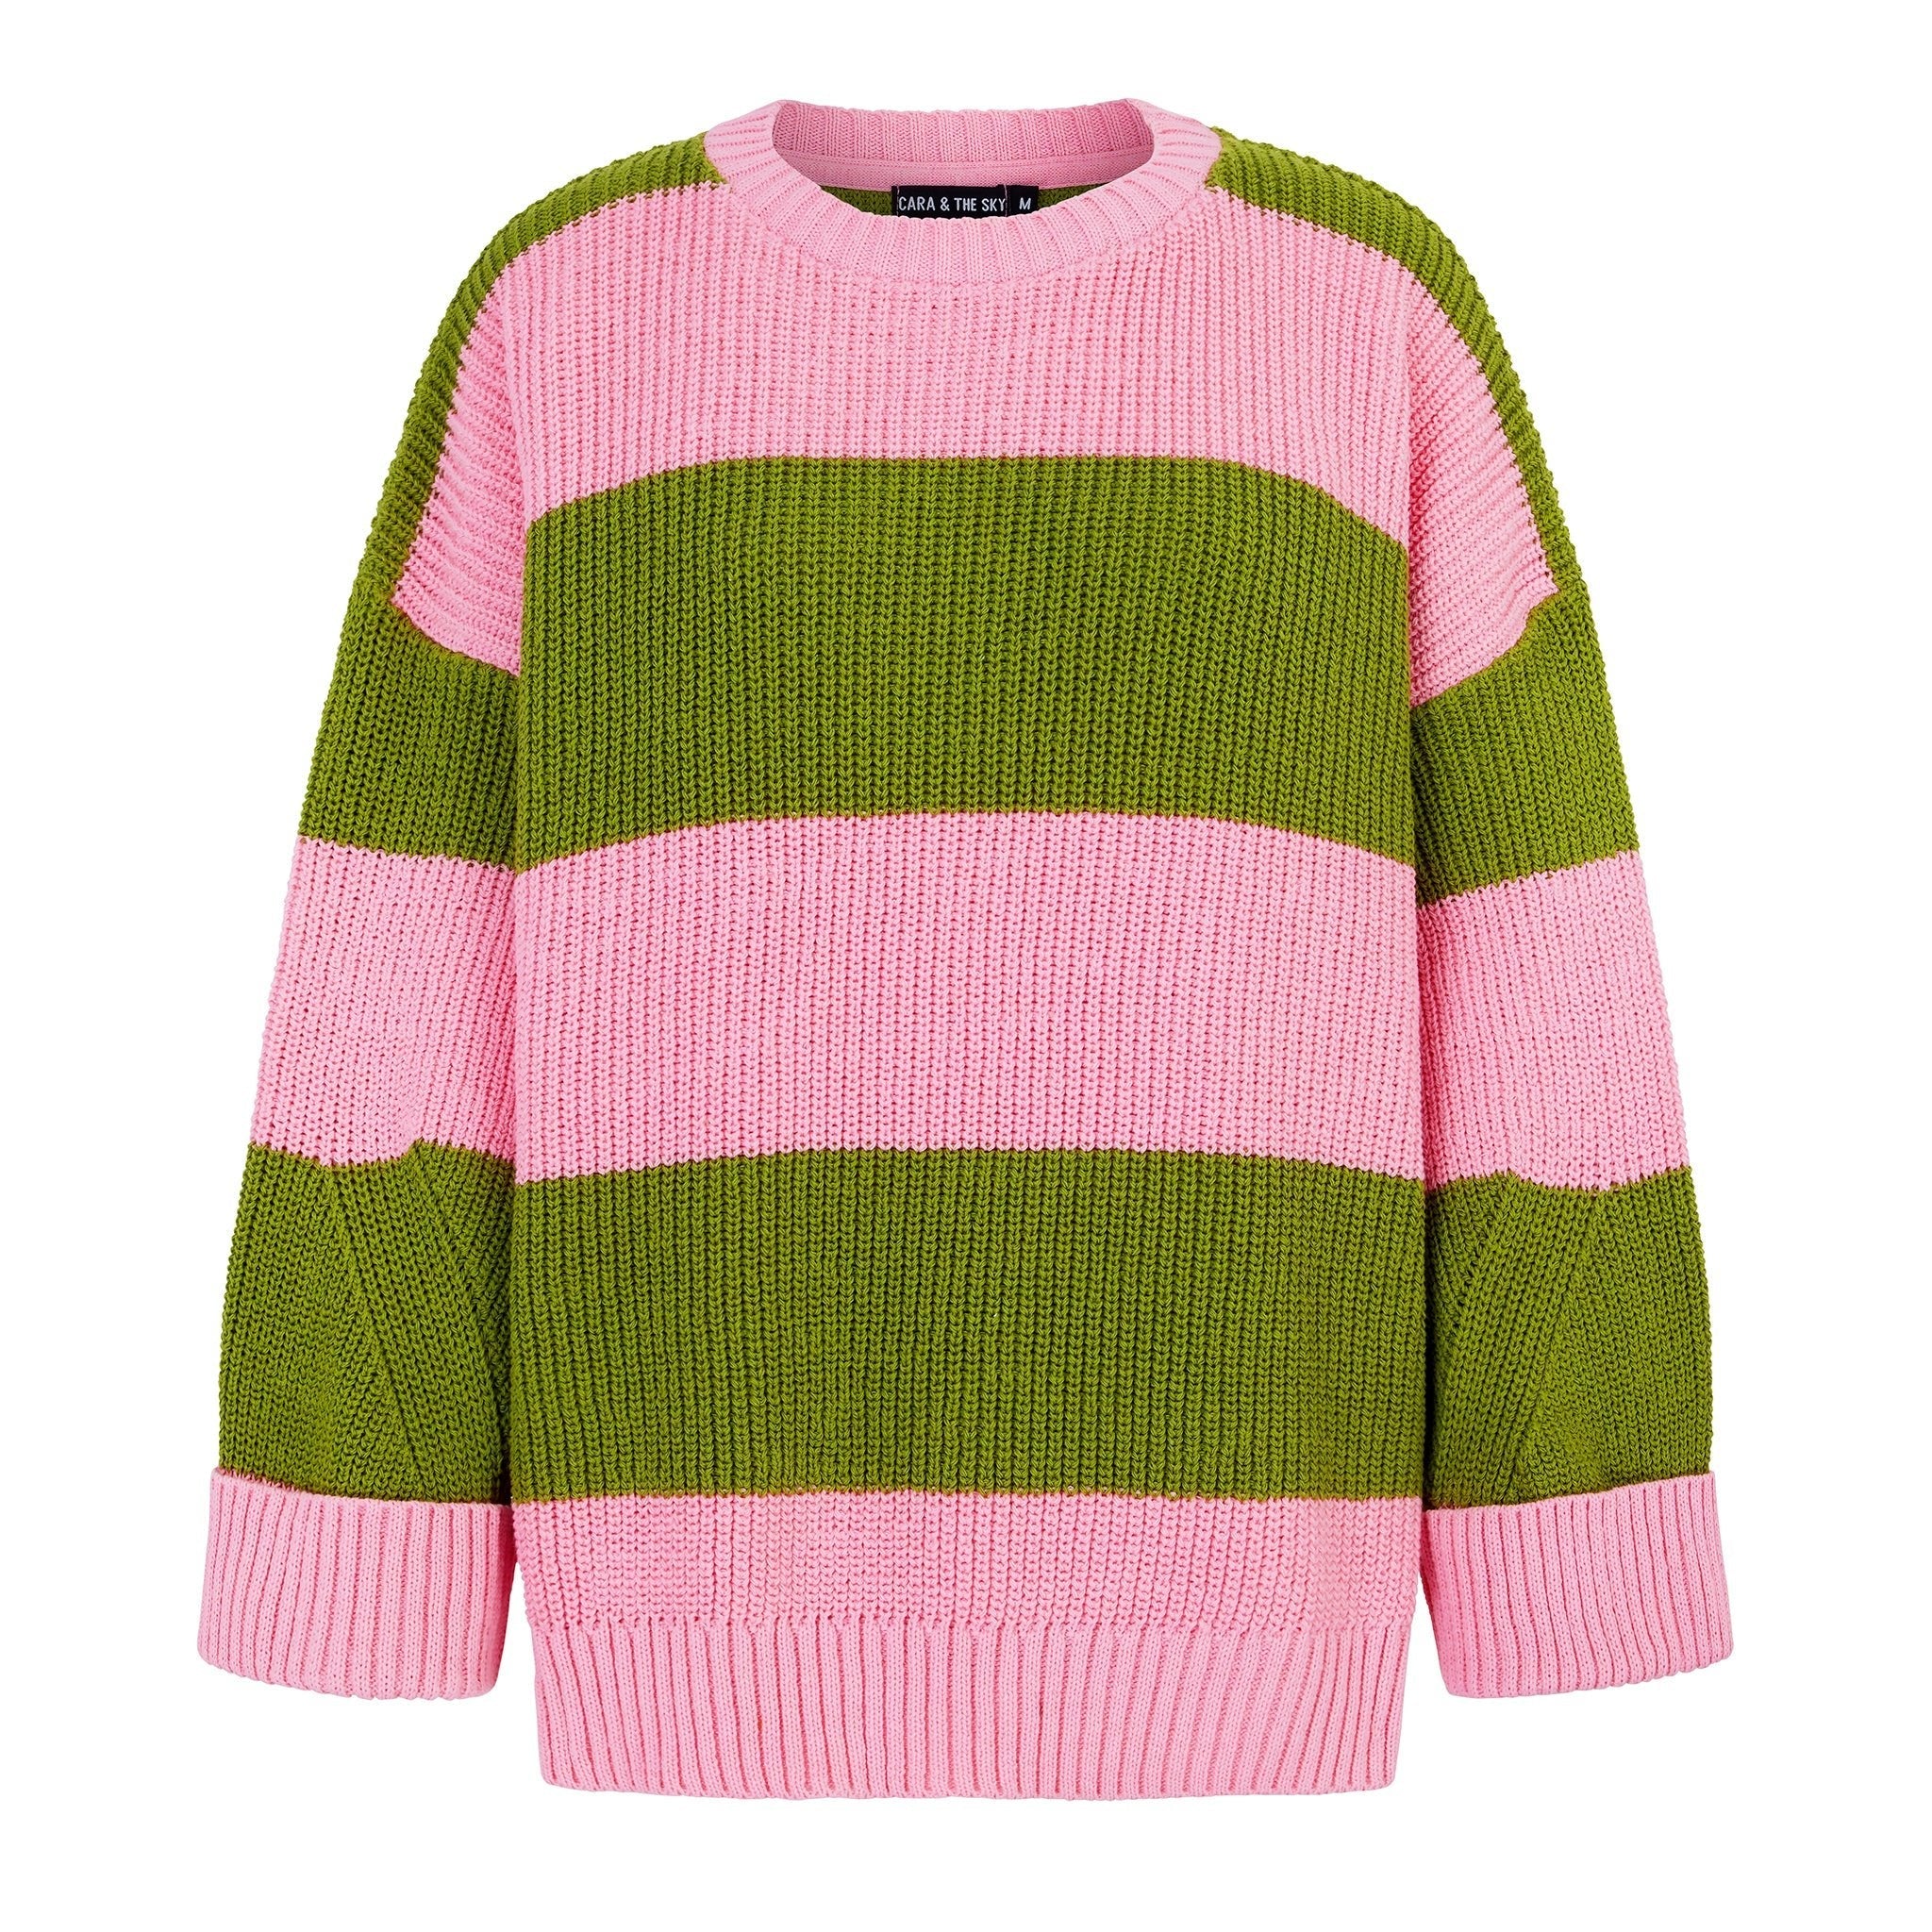 rhiannon-recycled-cotton-mix-chunky-stripe-jumper-pink-and-greencara-the-sky-888473.jpg